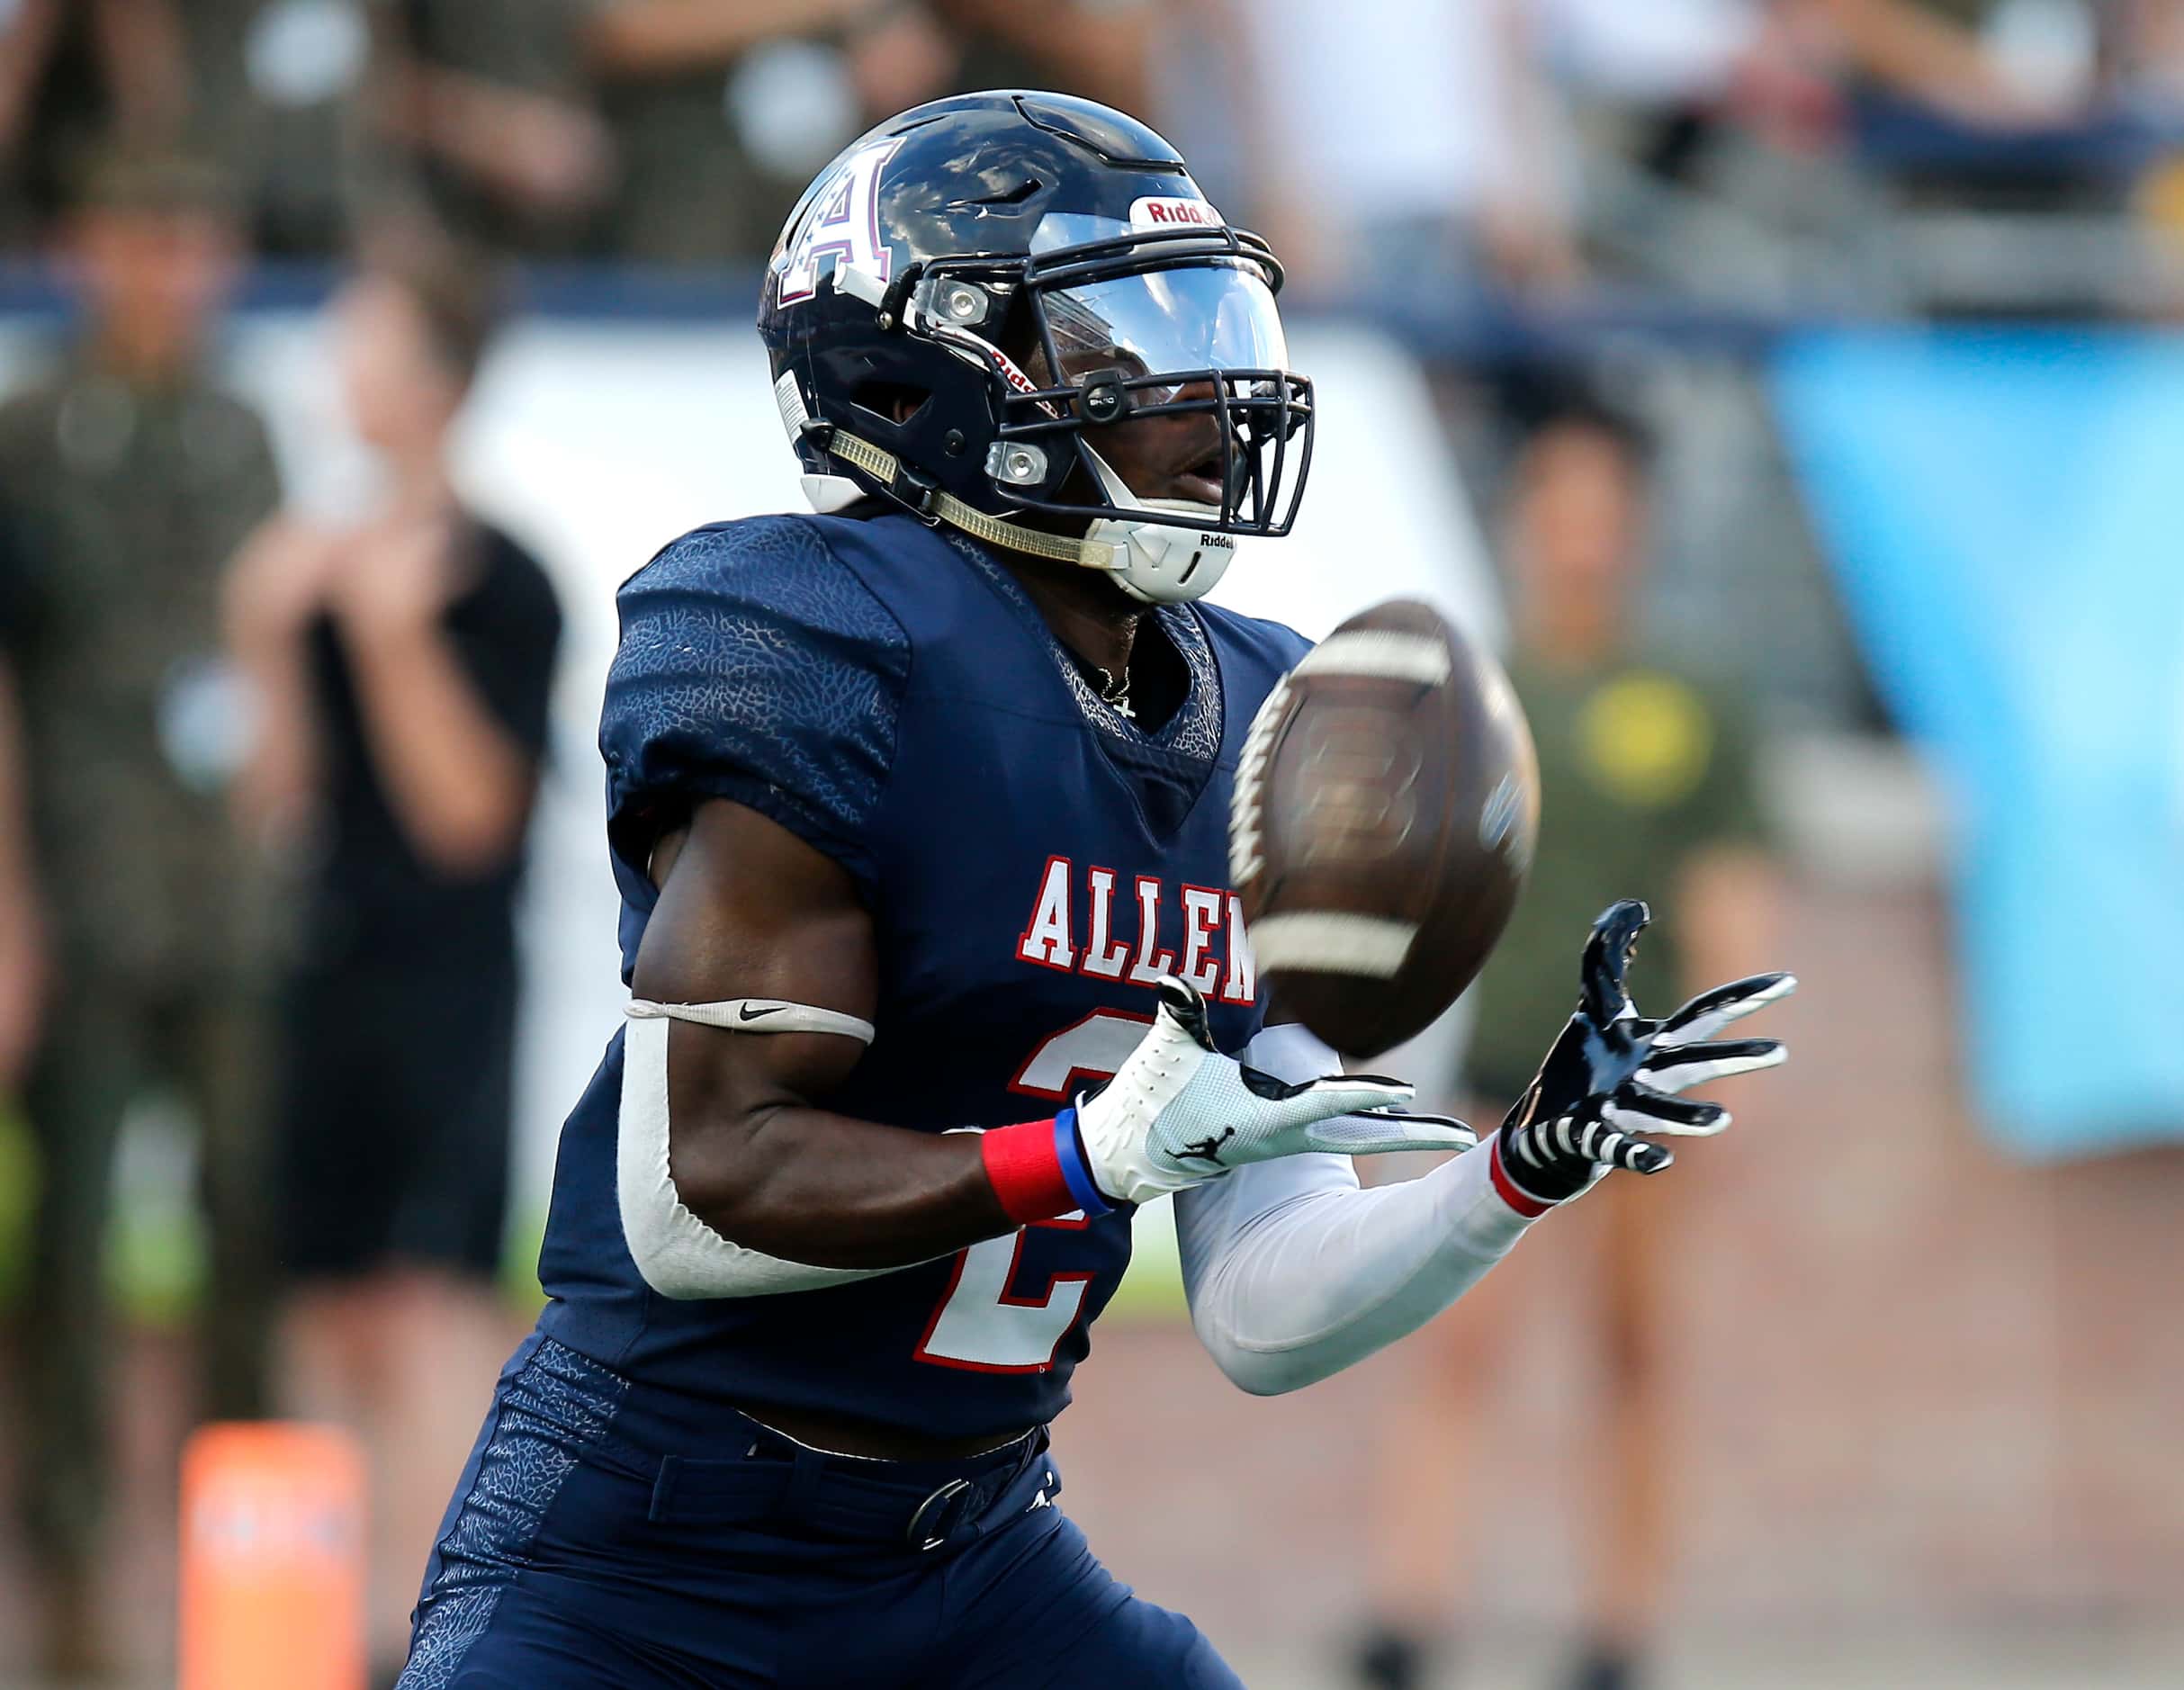 Allen High School kick returner Kayvion Sibley (2) catches the the opening kickoff during...